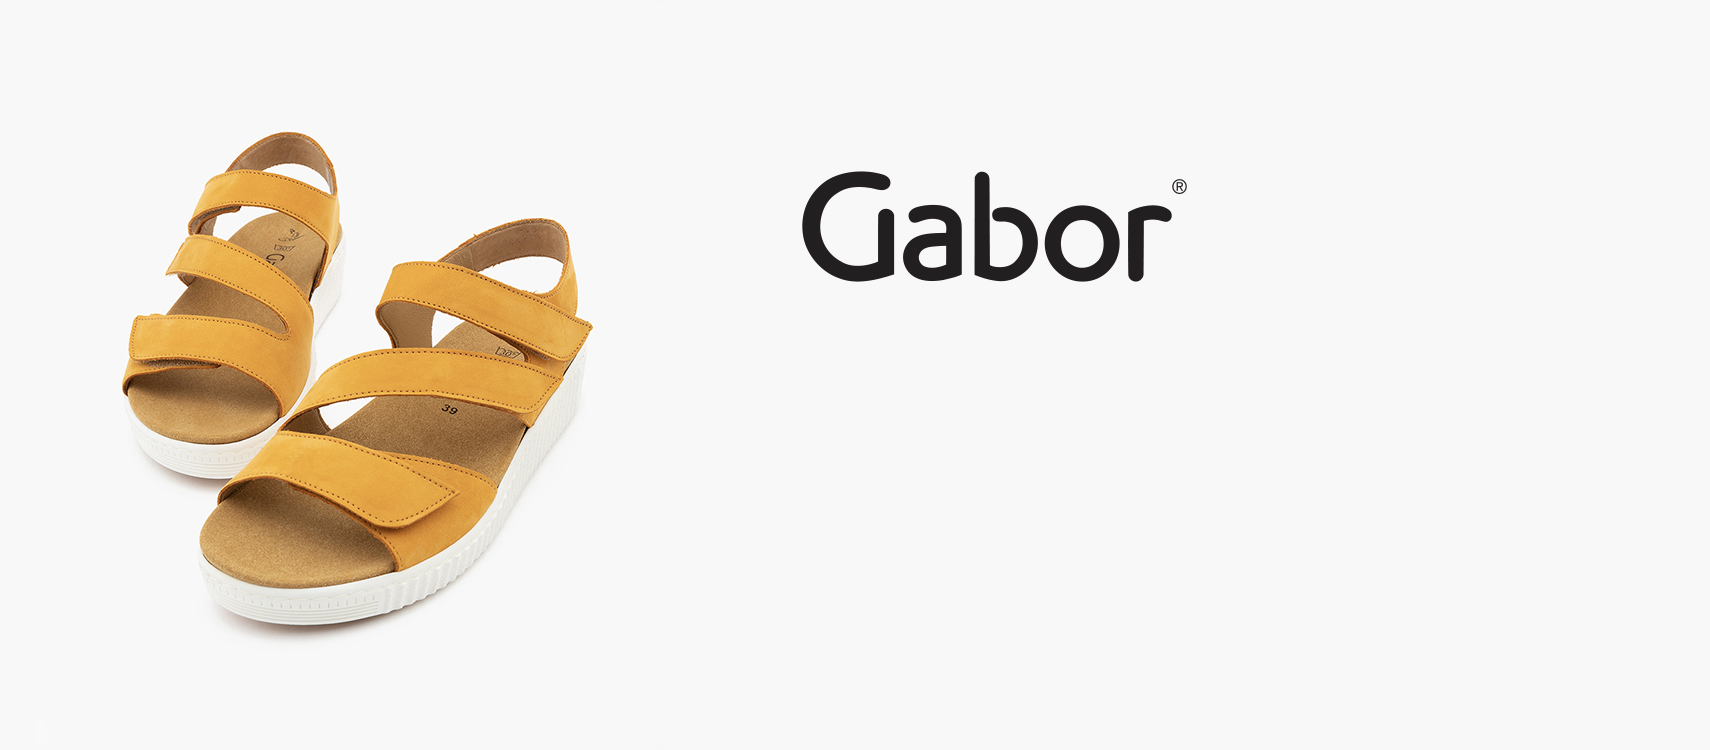 Shoes - Feel Confident with Our Gabor Shoes